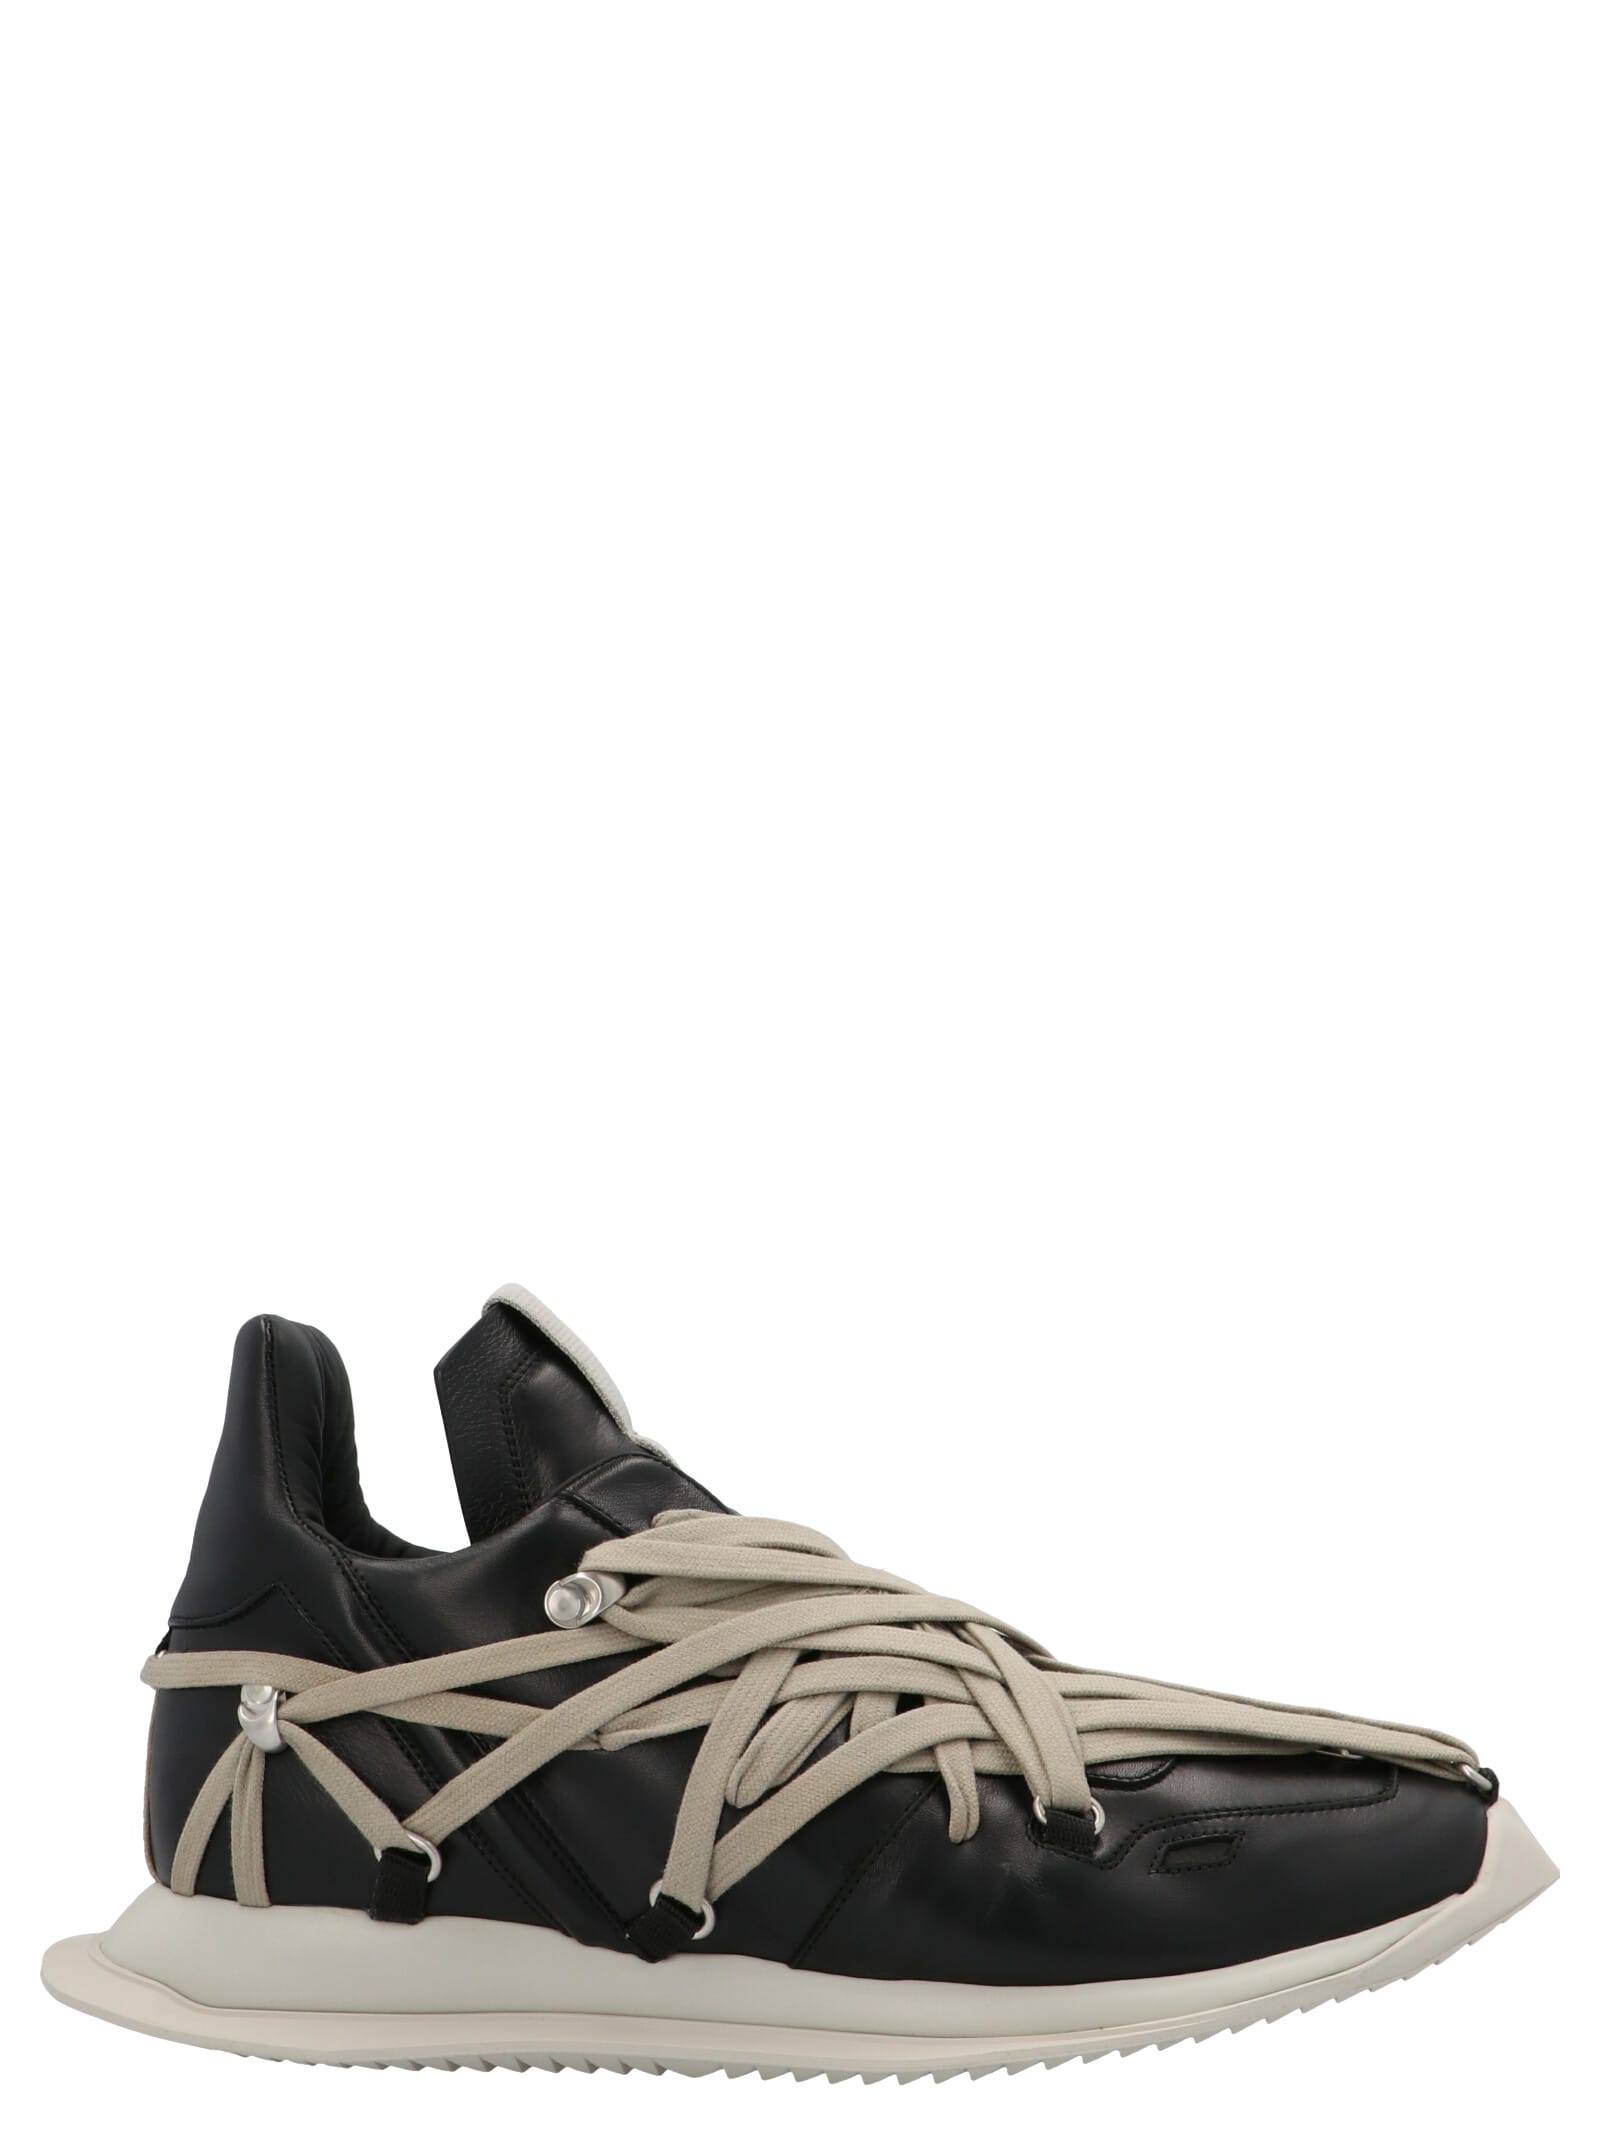 Rick Owens megalaced Runner Shoes